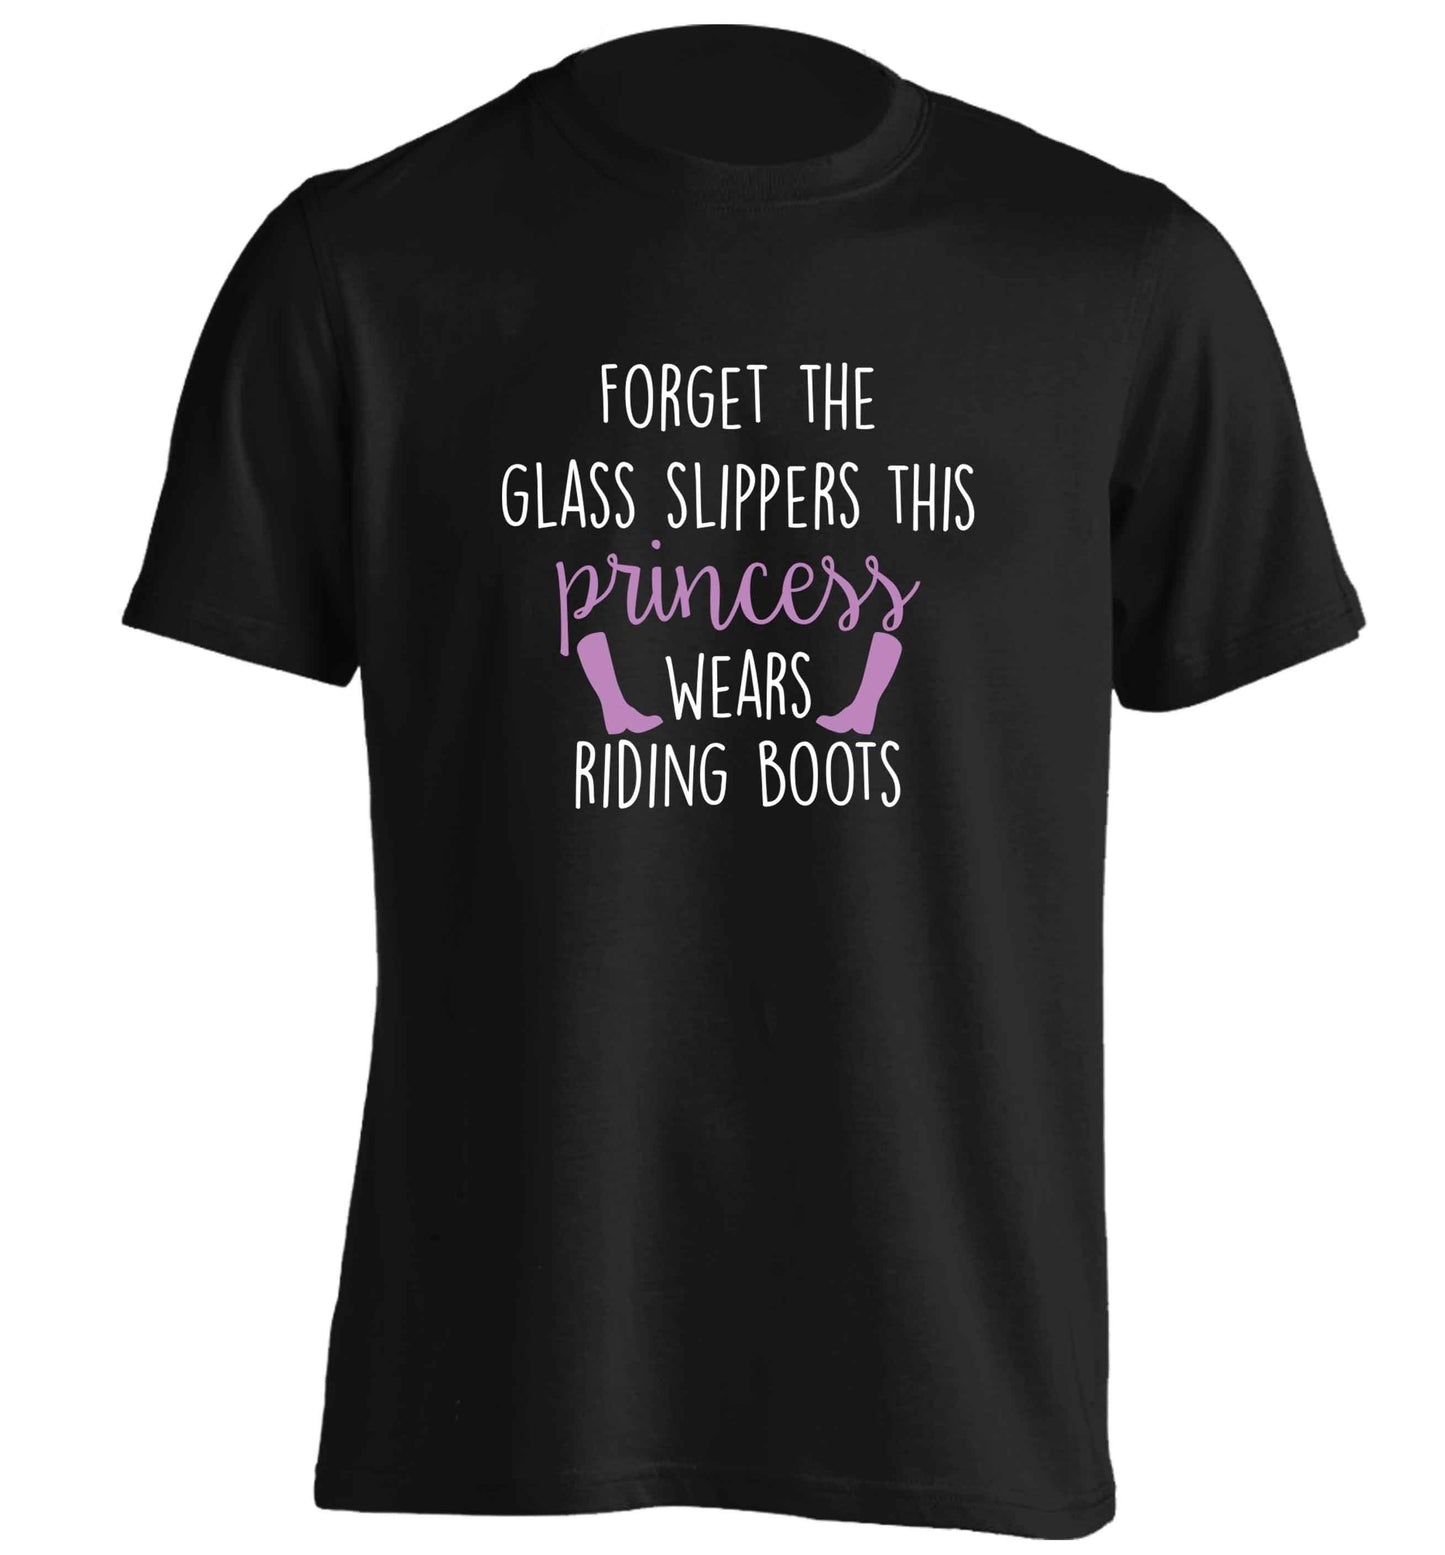 Forget the glass slippers this princess wears riding boots adults unisex black Tshirt 2XL